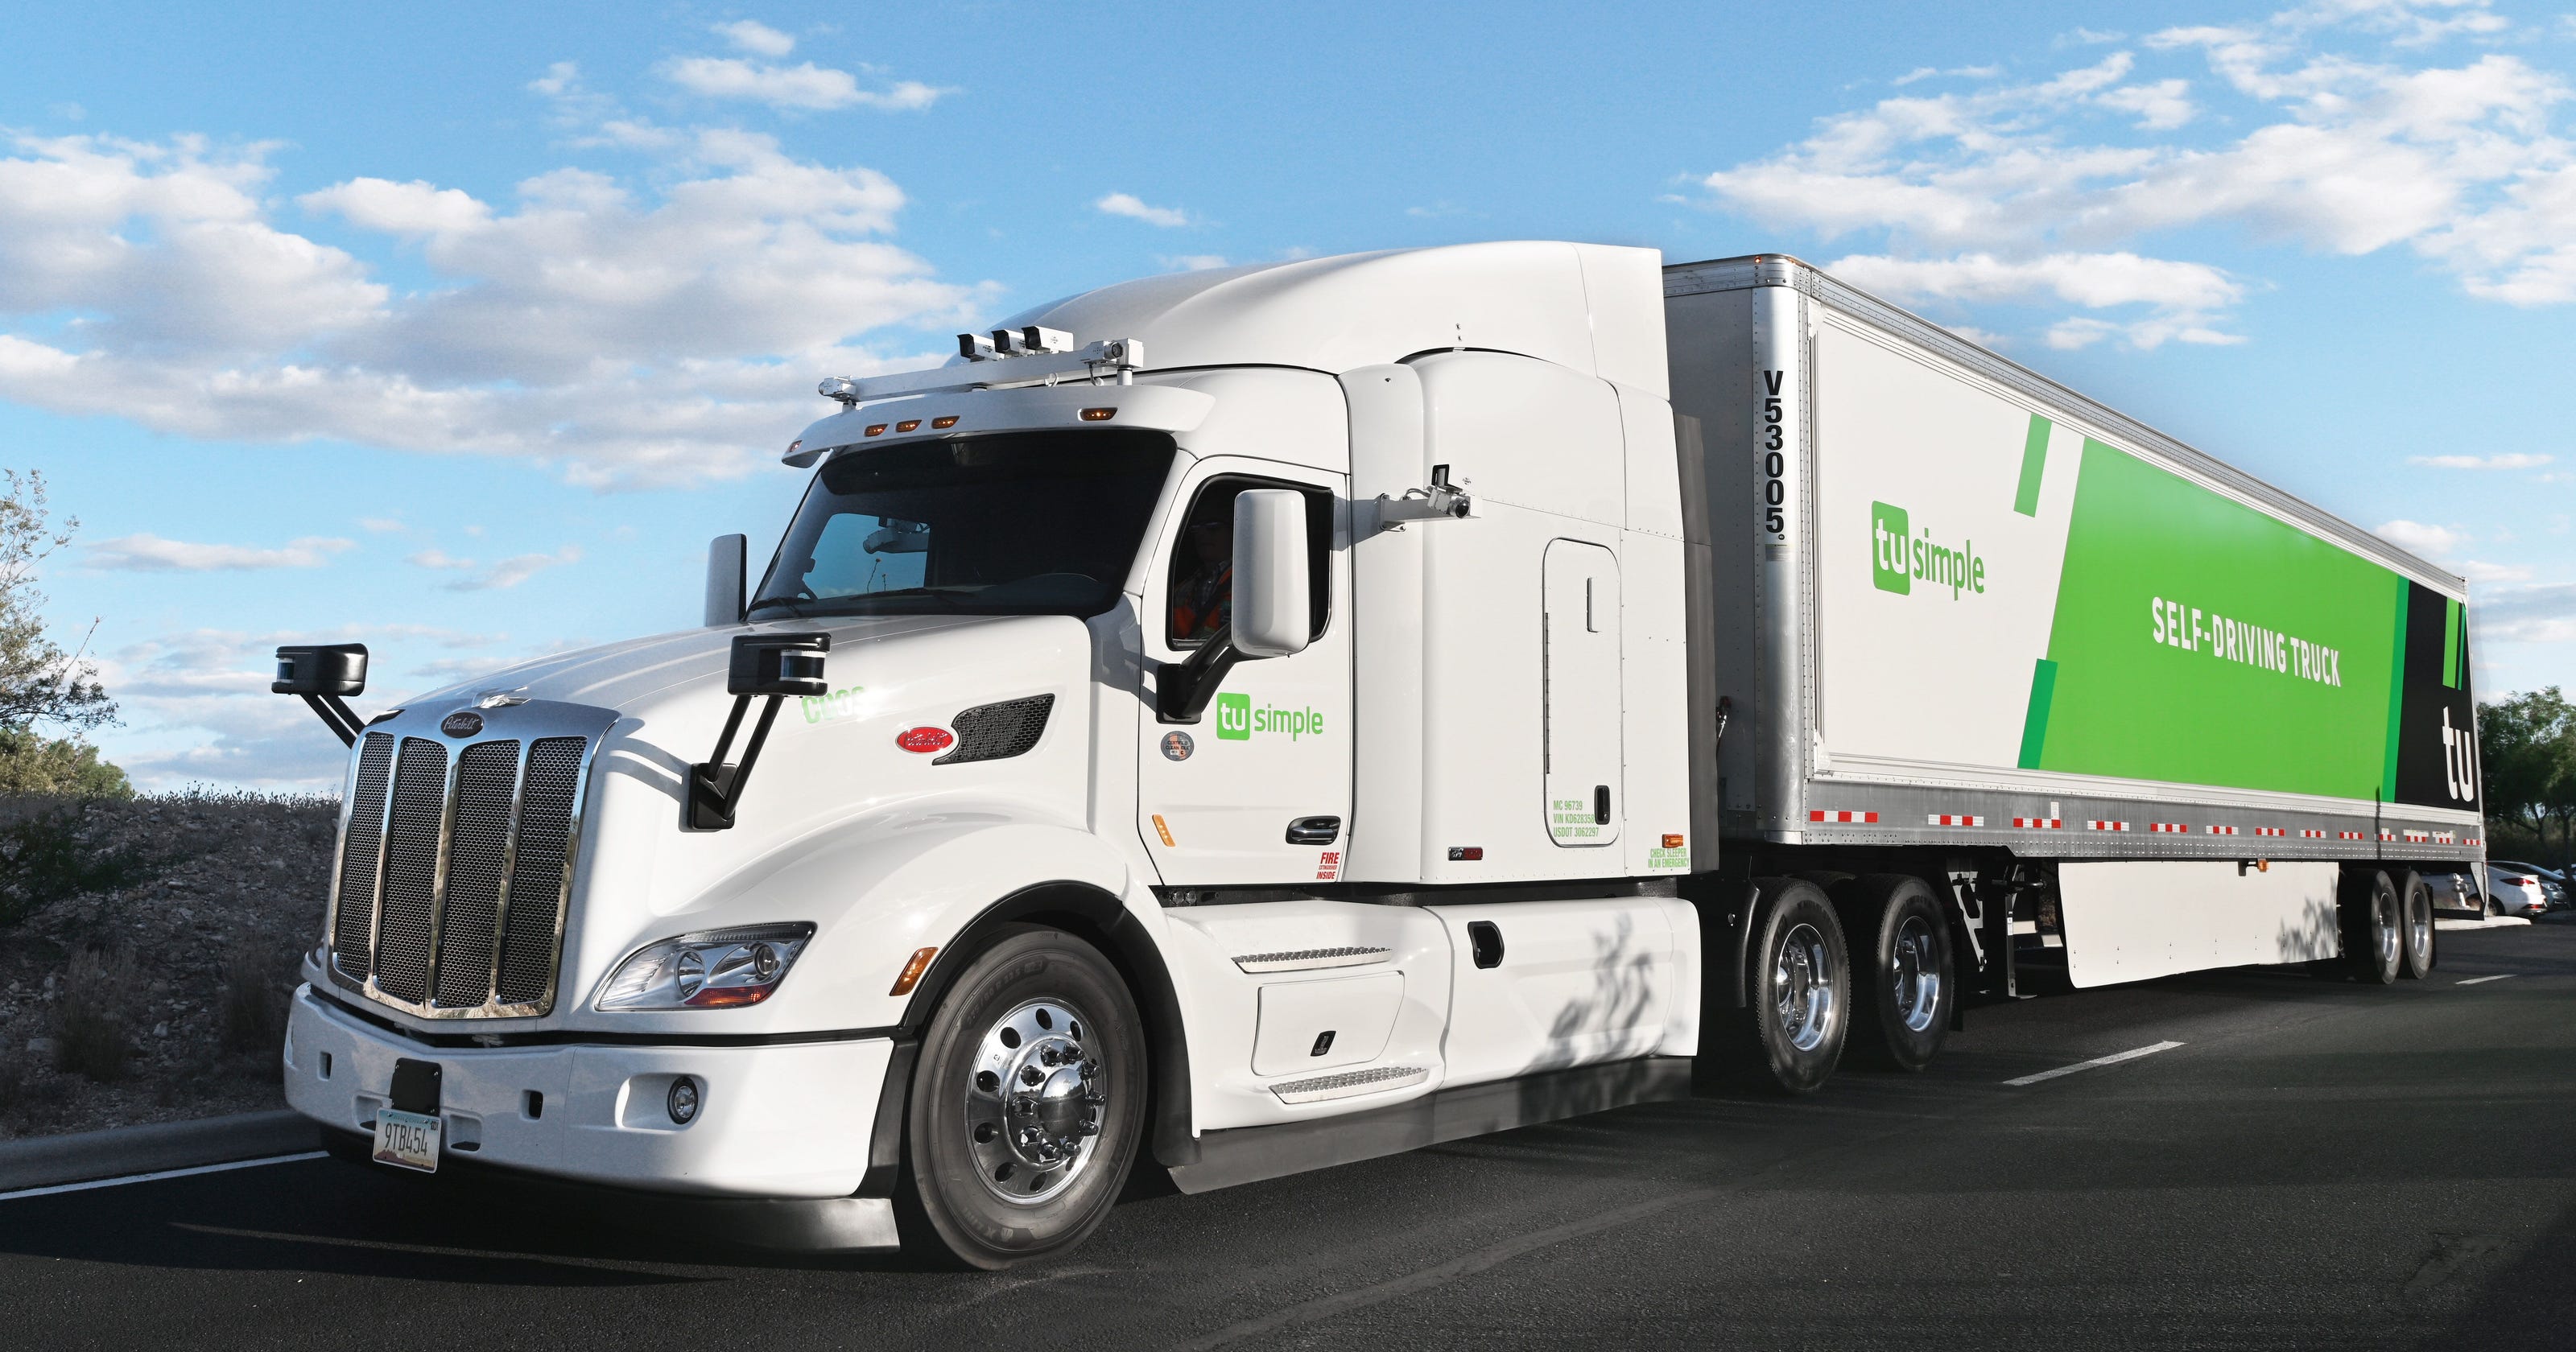 Company will double number of driverless trips for big-rig trucks in Arizona